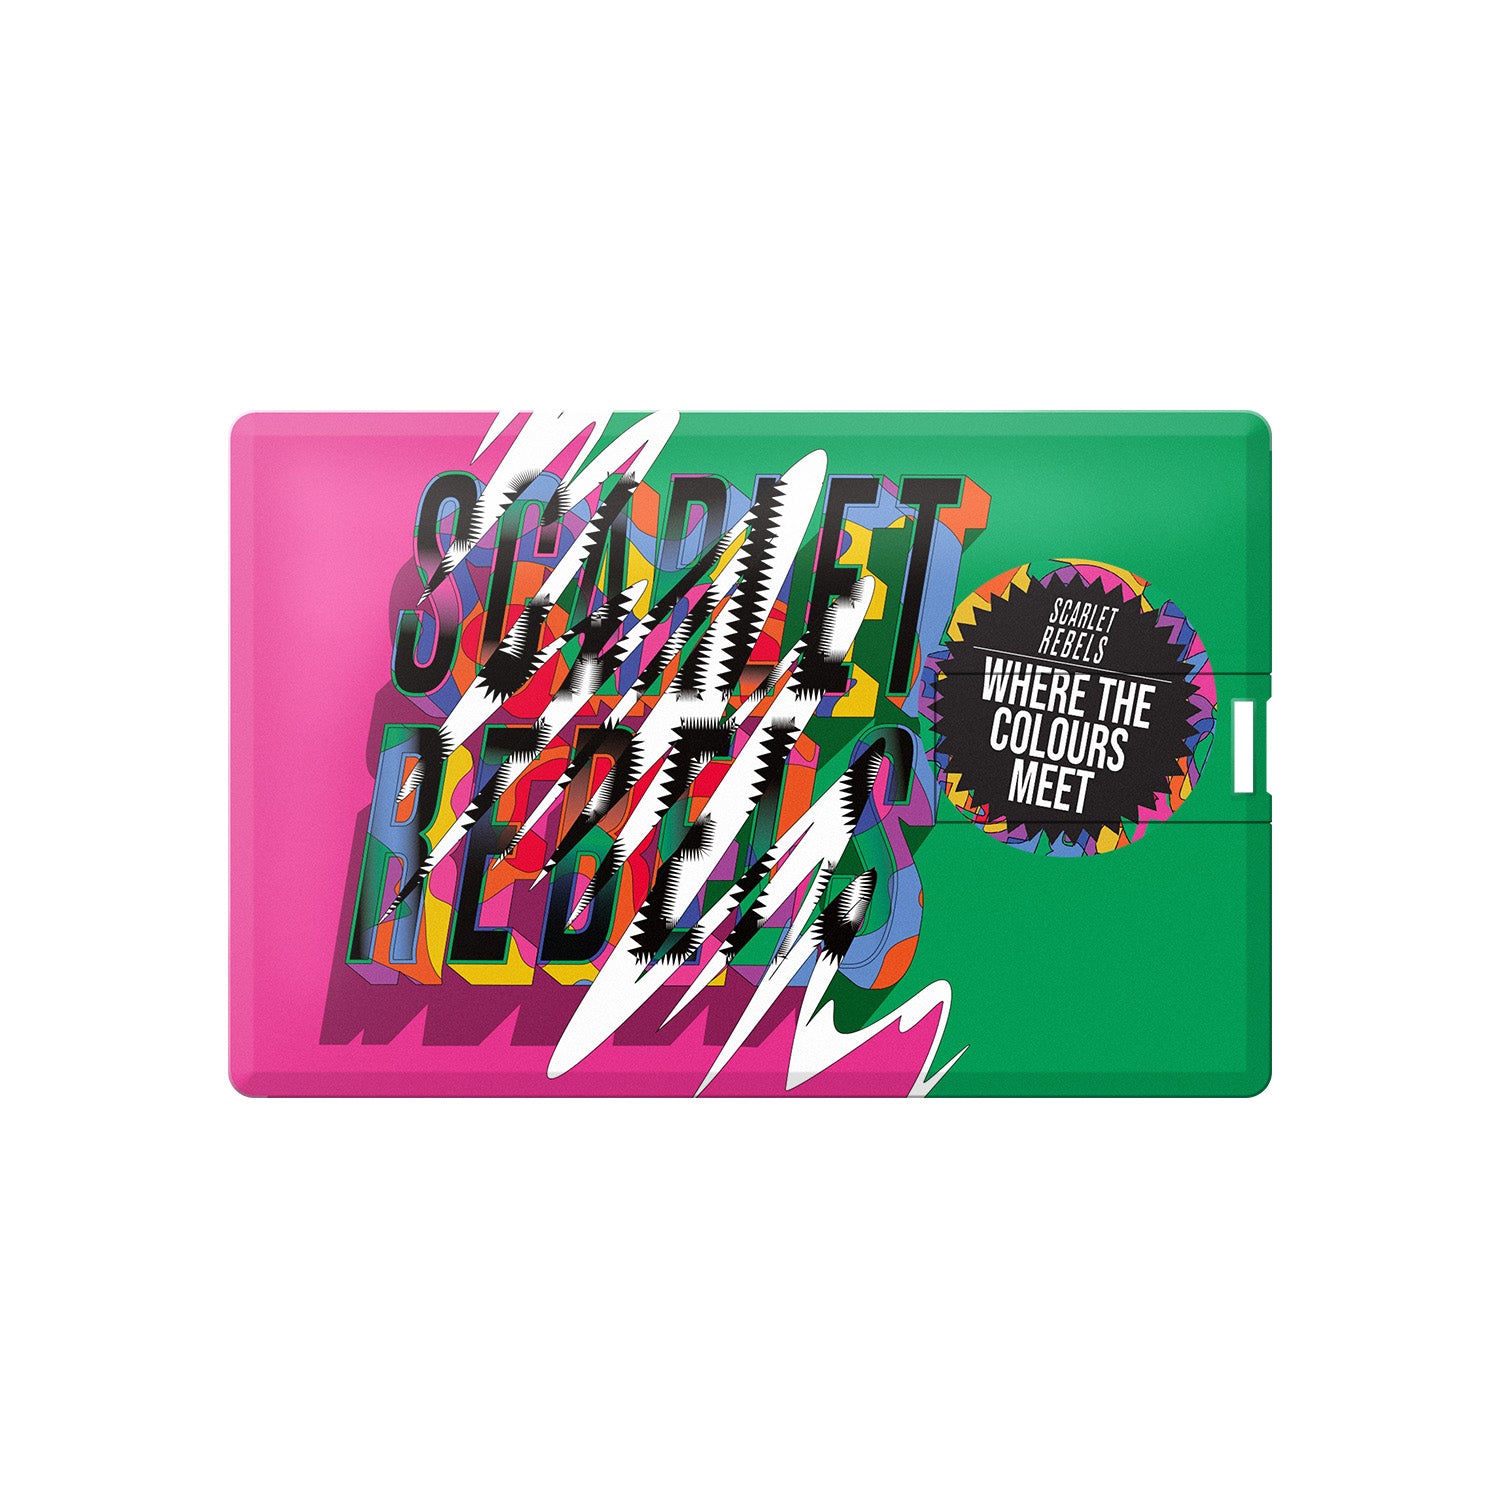 Scarlet Rebels "Where The Colours Meet" USB Drive - PRE-ORDER